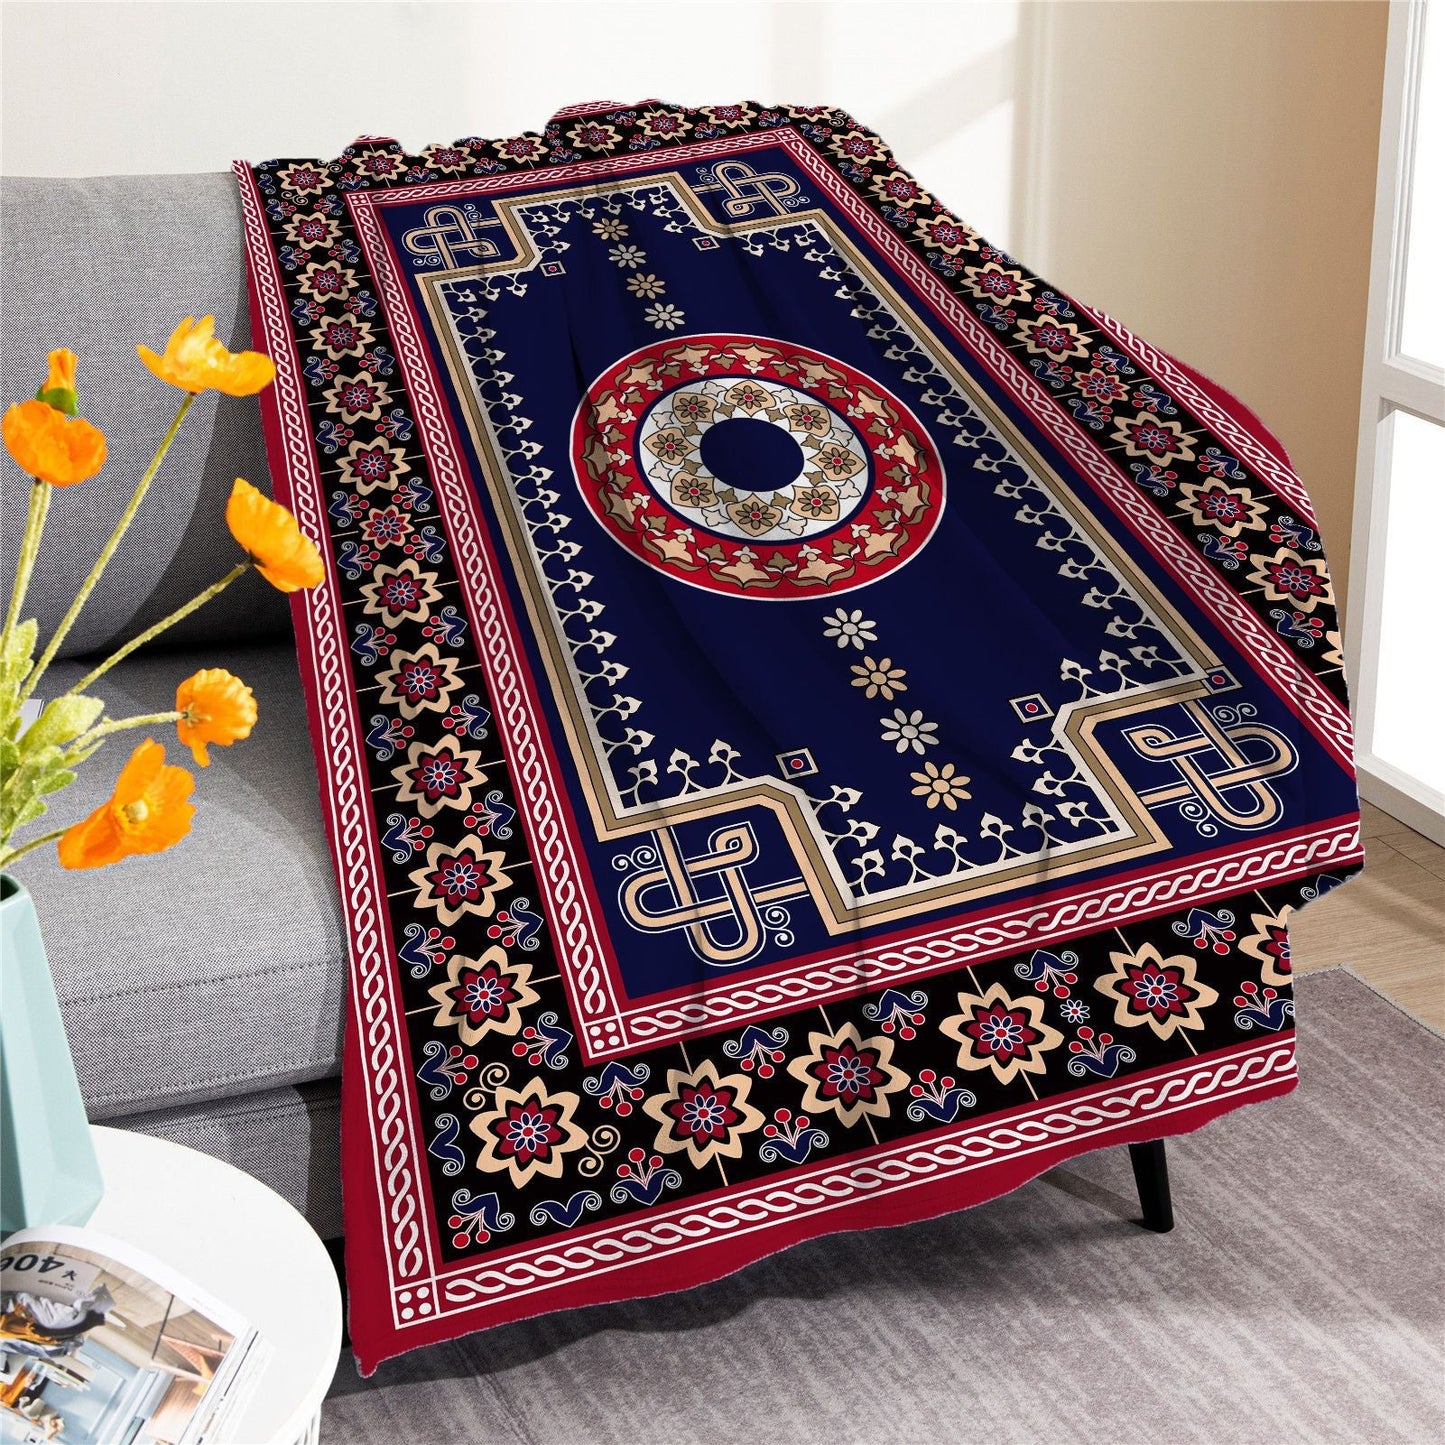 Vintage Boho Fleece Throw Blankets-Blankets-M20220701-24-50*60 Inches-Free Shipping at meselling99